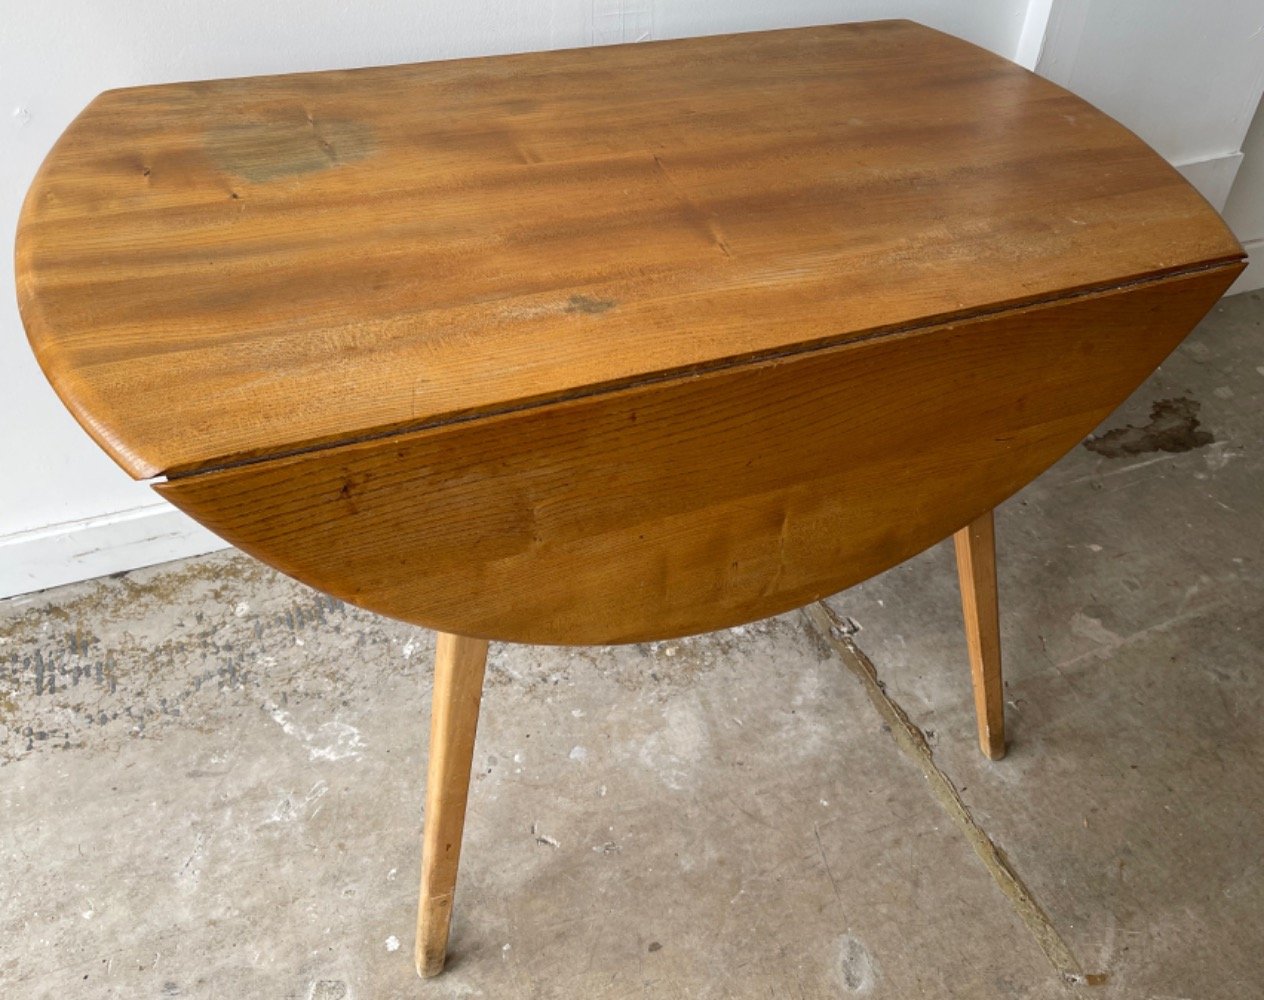 STAR ERCOL FURNITURE PIECE!A light oak round two-leaf folding dining table with 4 spindle ERCOL - Image 3 of 3